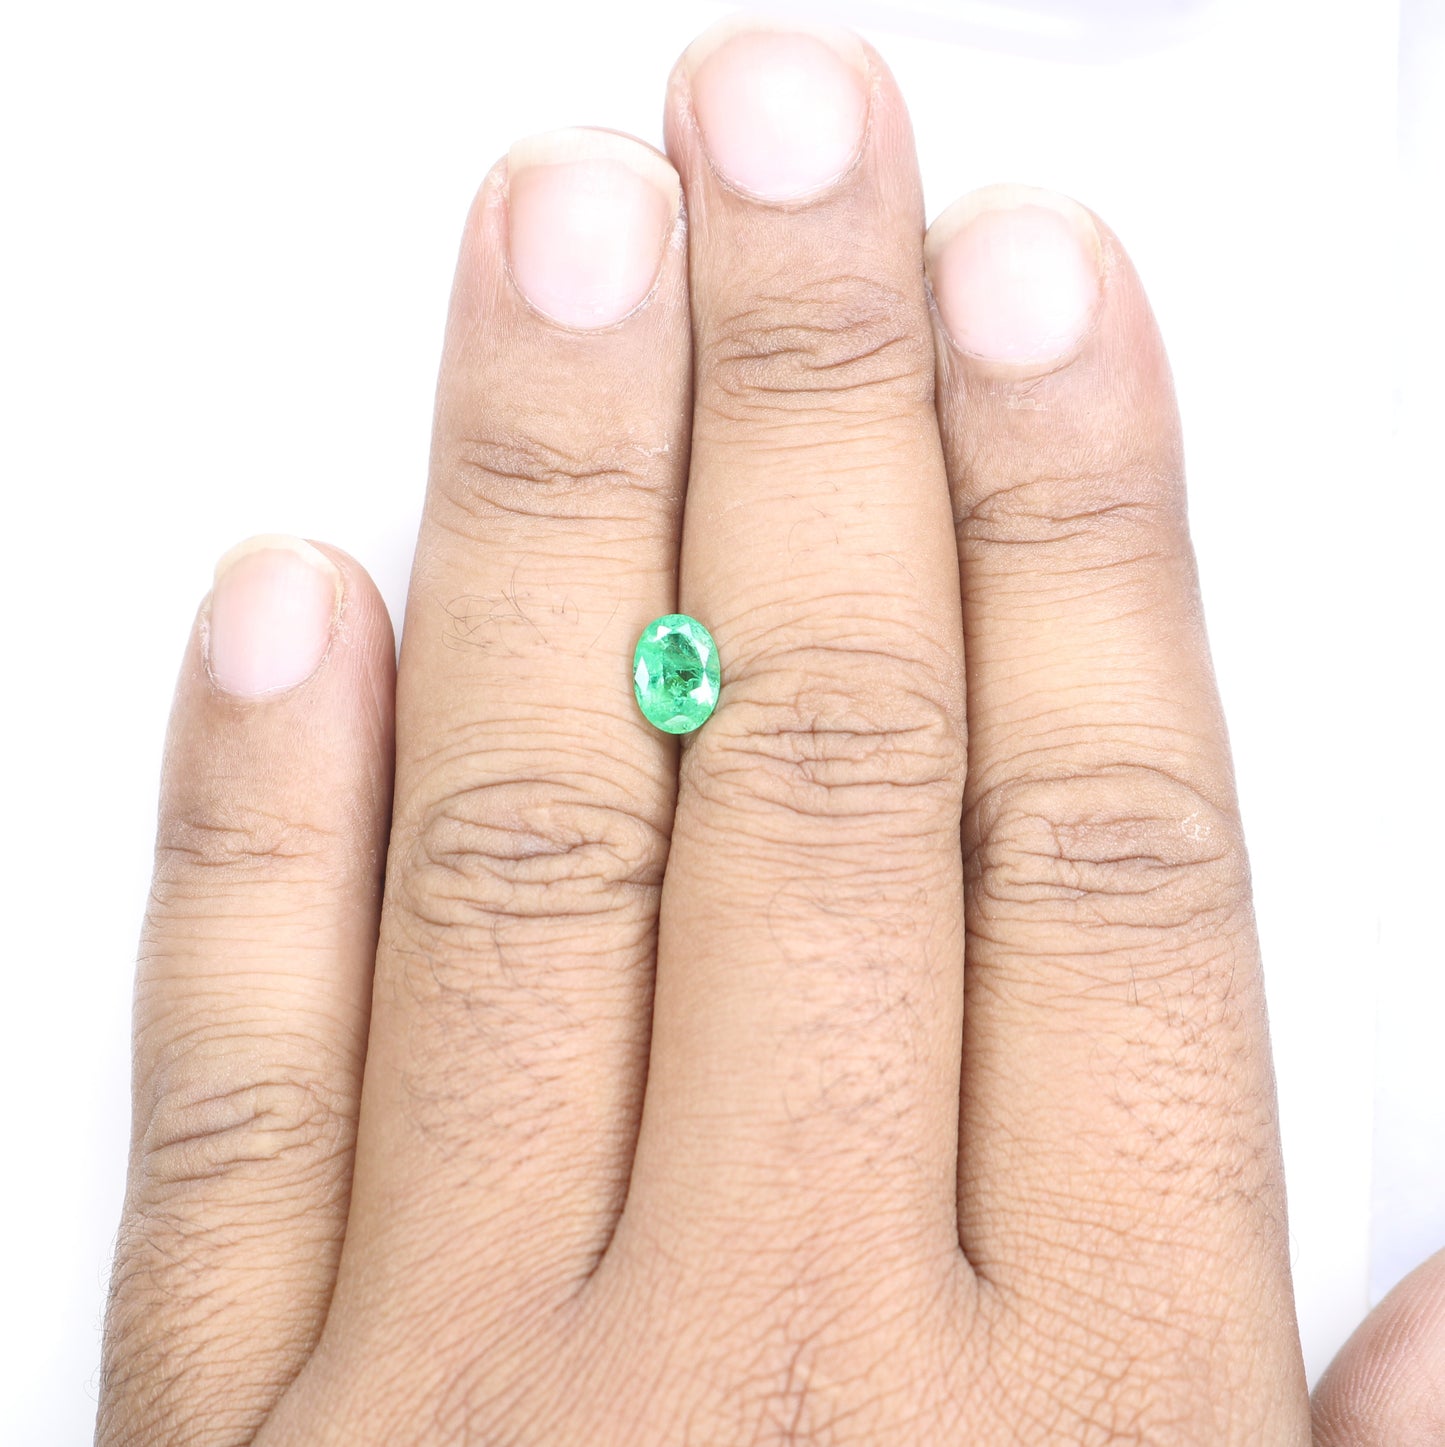 1.05 CT Natural Green Emerald Oval Shape Galaxy Gemstone For Engagement Ring